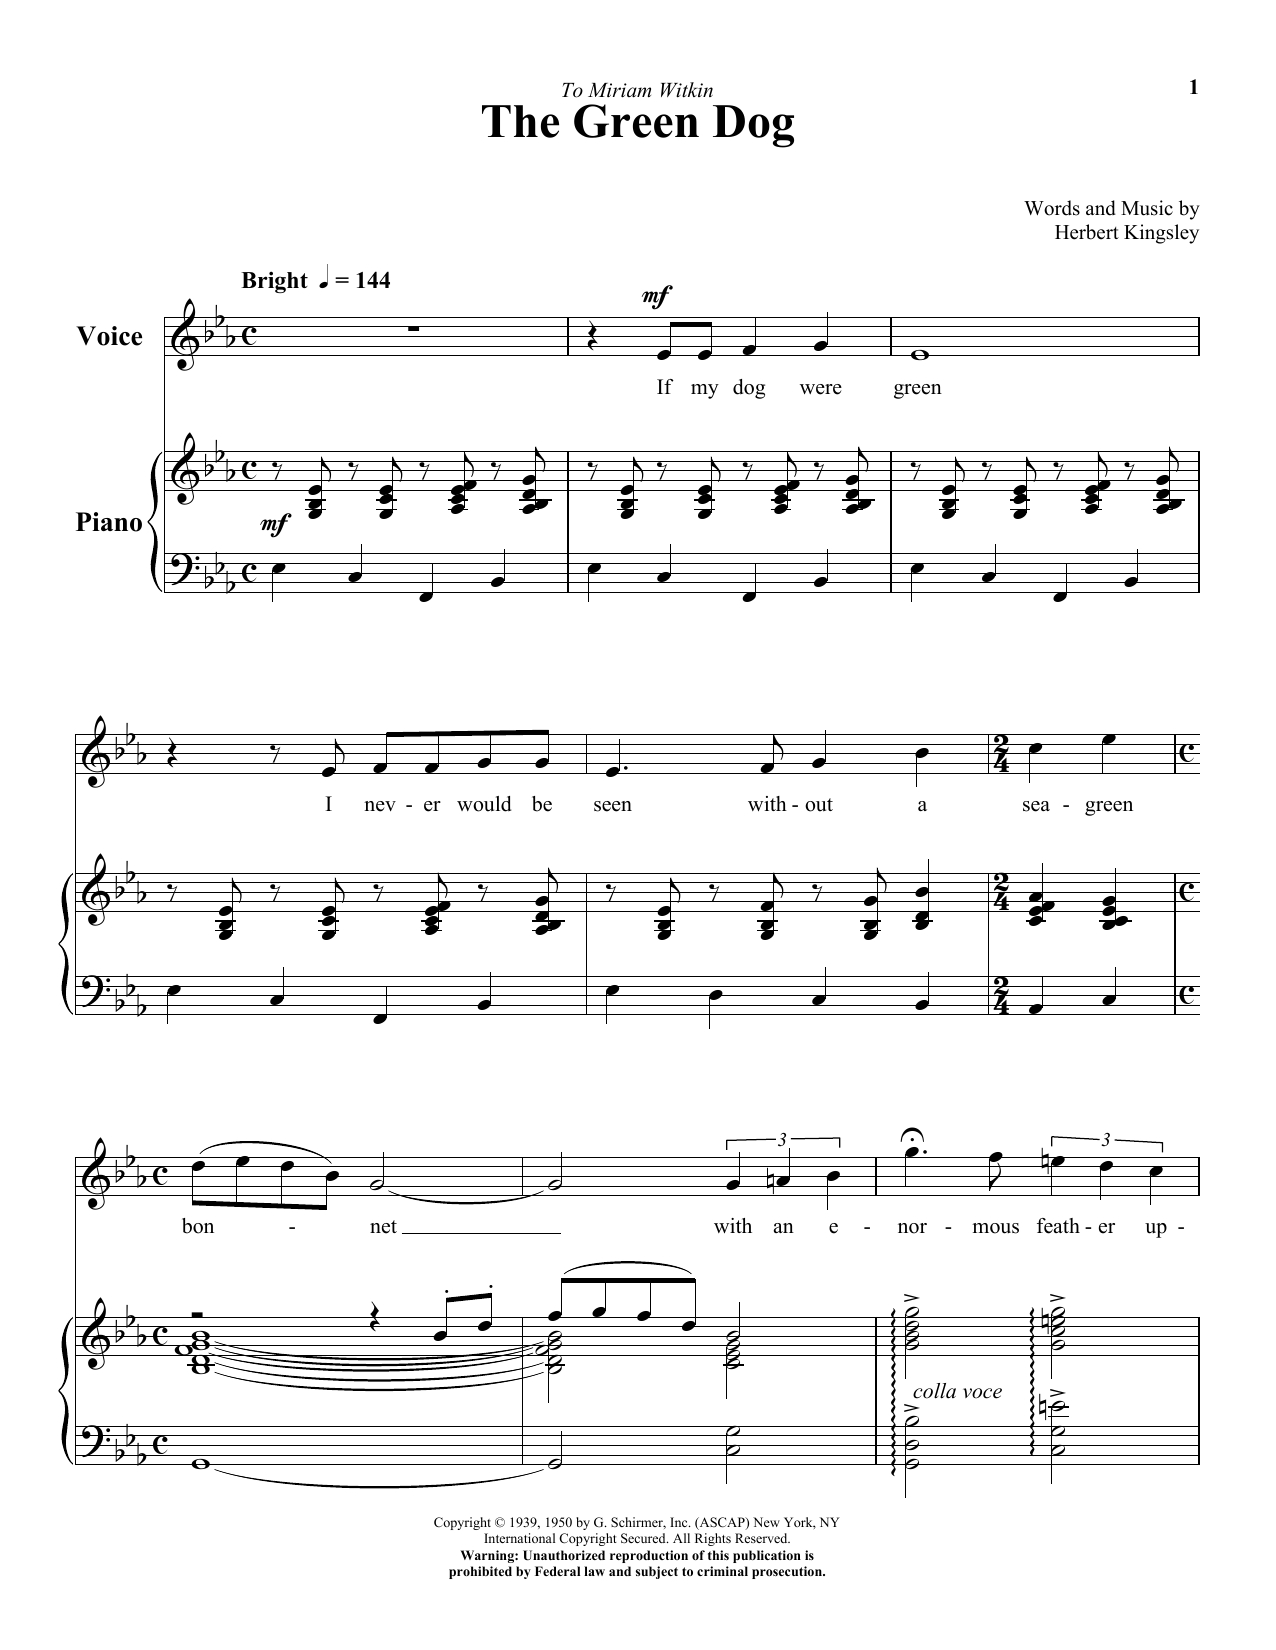 The Green Dog Sheet Music | Herbert Kingsley | Piano &amp;amp; Vocal - Free Printable Sheet Music For Voice And Piano